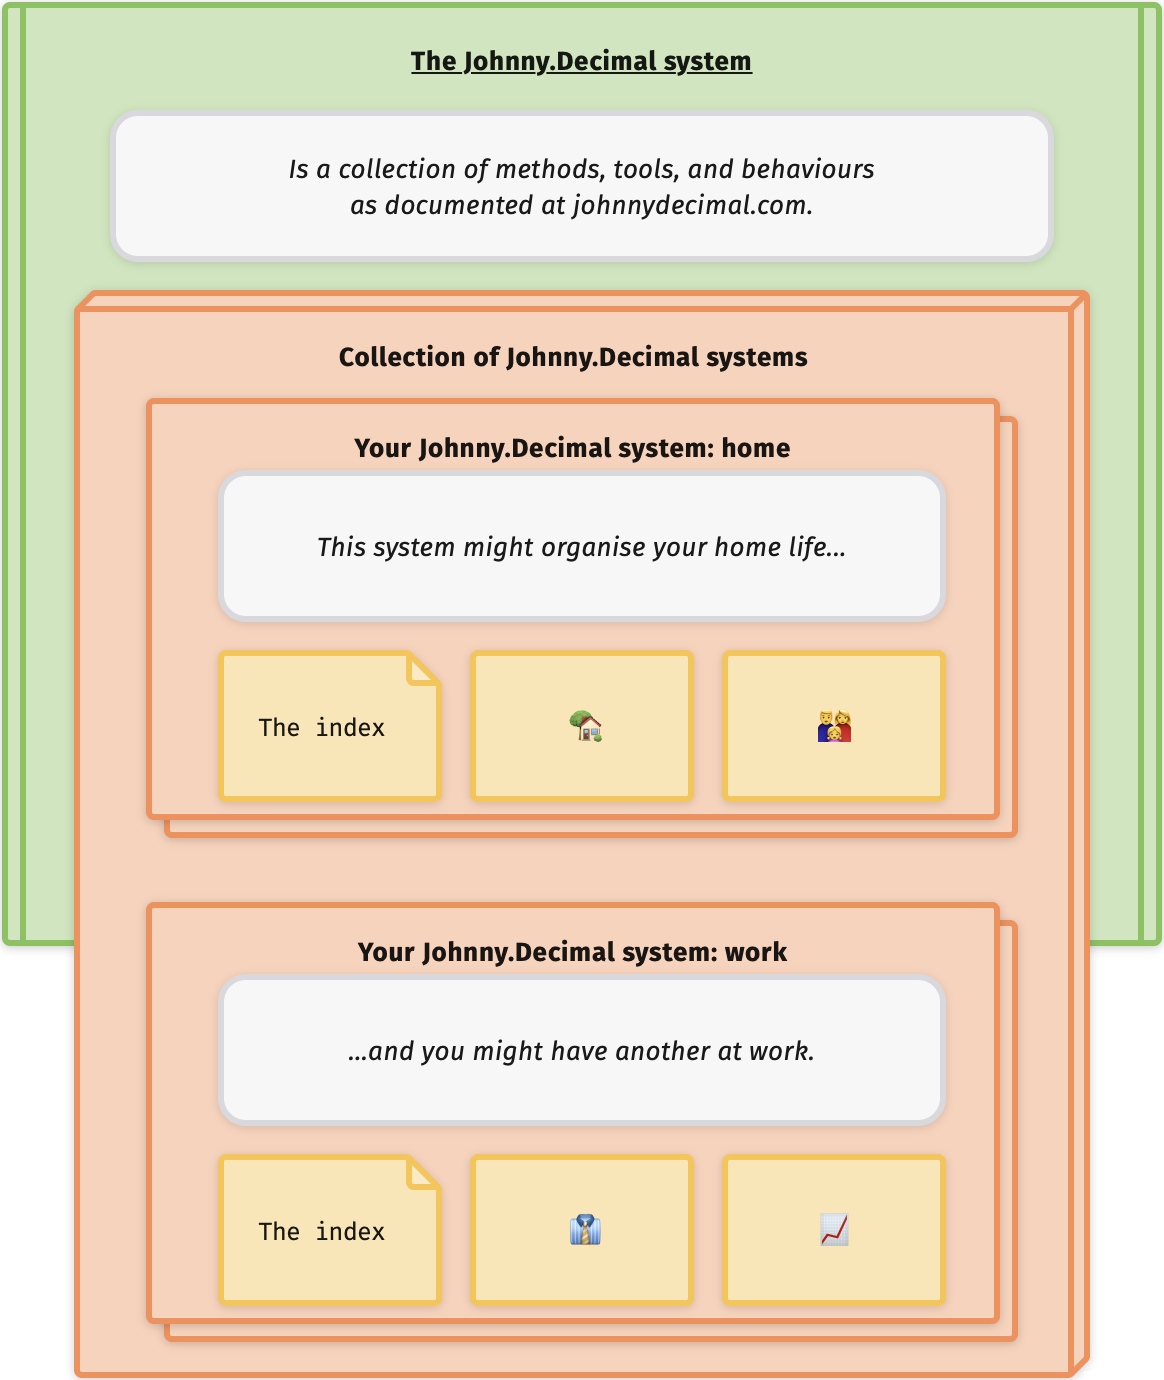 The diagram now shows two Johnny.Decimal systems. They are contained within another orange box denoting your 'collection of systems'.